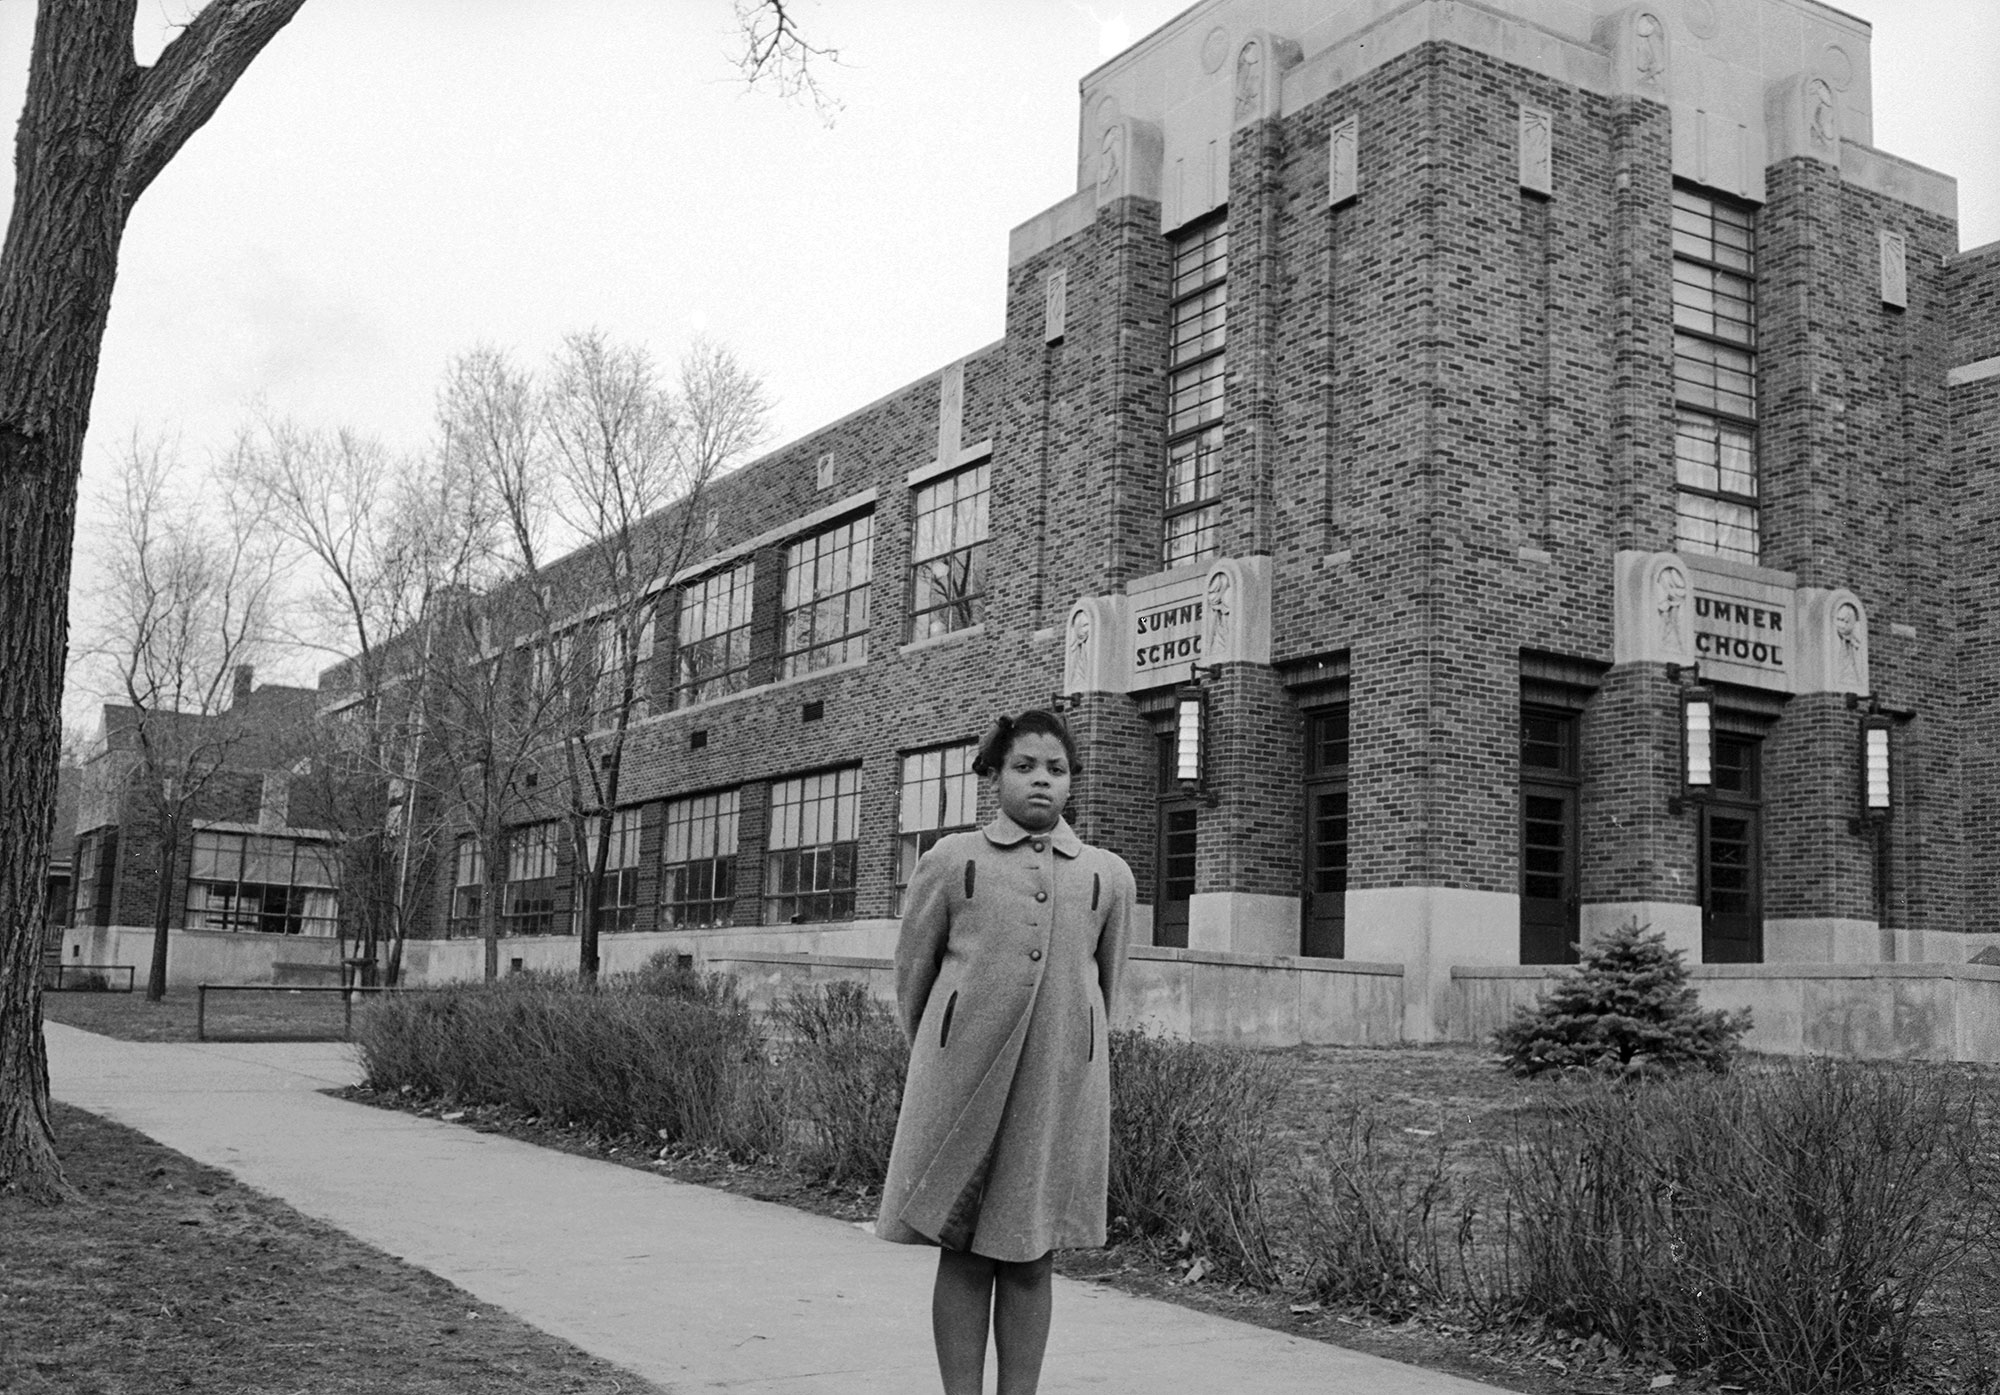 Portrait of nine-year-old African-American student Linda Brown as she poses outside Sumner Elementary School, Topkea, Kansas, 1953. When her enrollment in the racially segregated school was blocked, her family initiated the landmark Civil Rights lawsuit 'Brown V. Board of Education,' that led to the beginning of integration in the US education system. (Photo by Carl Iwasaki/The LIFE Images Collection/Getty Images)